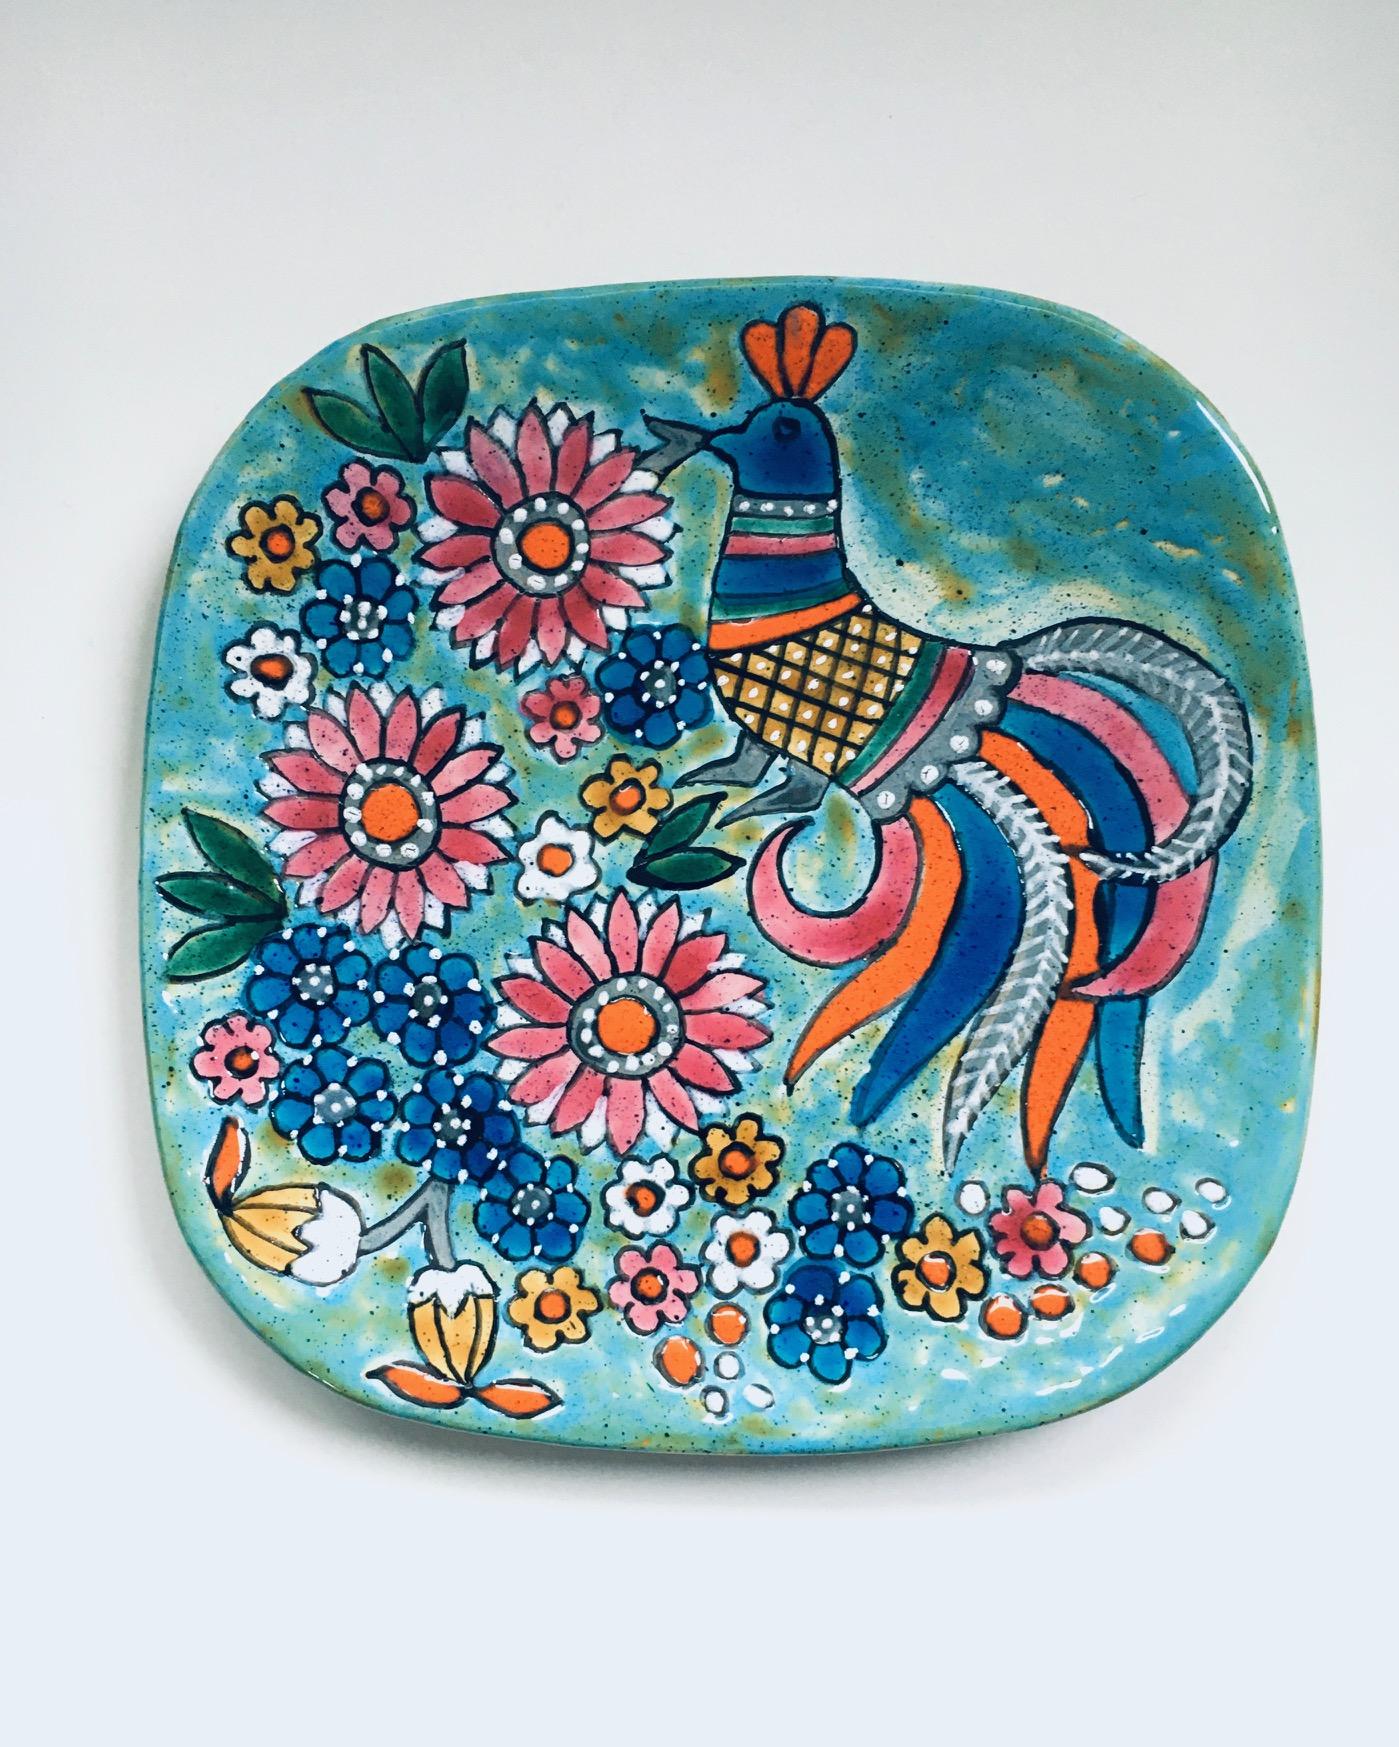 Vintage Midcentury Modern Art Pottery Charger, Dish Plate by Marjatta Taburet. Handcrafted in Quimper Britain France. 1960's. Hand-painted & signed one of a kind decorative ceramic charger created by listed artist master potter in Quimper Marjatta